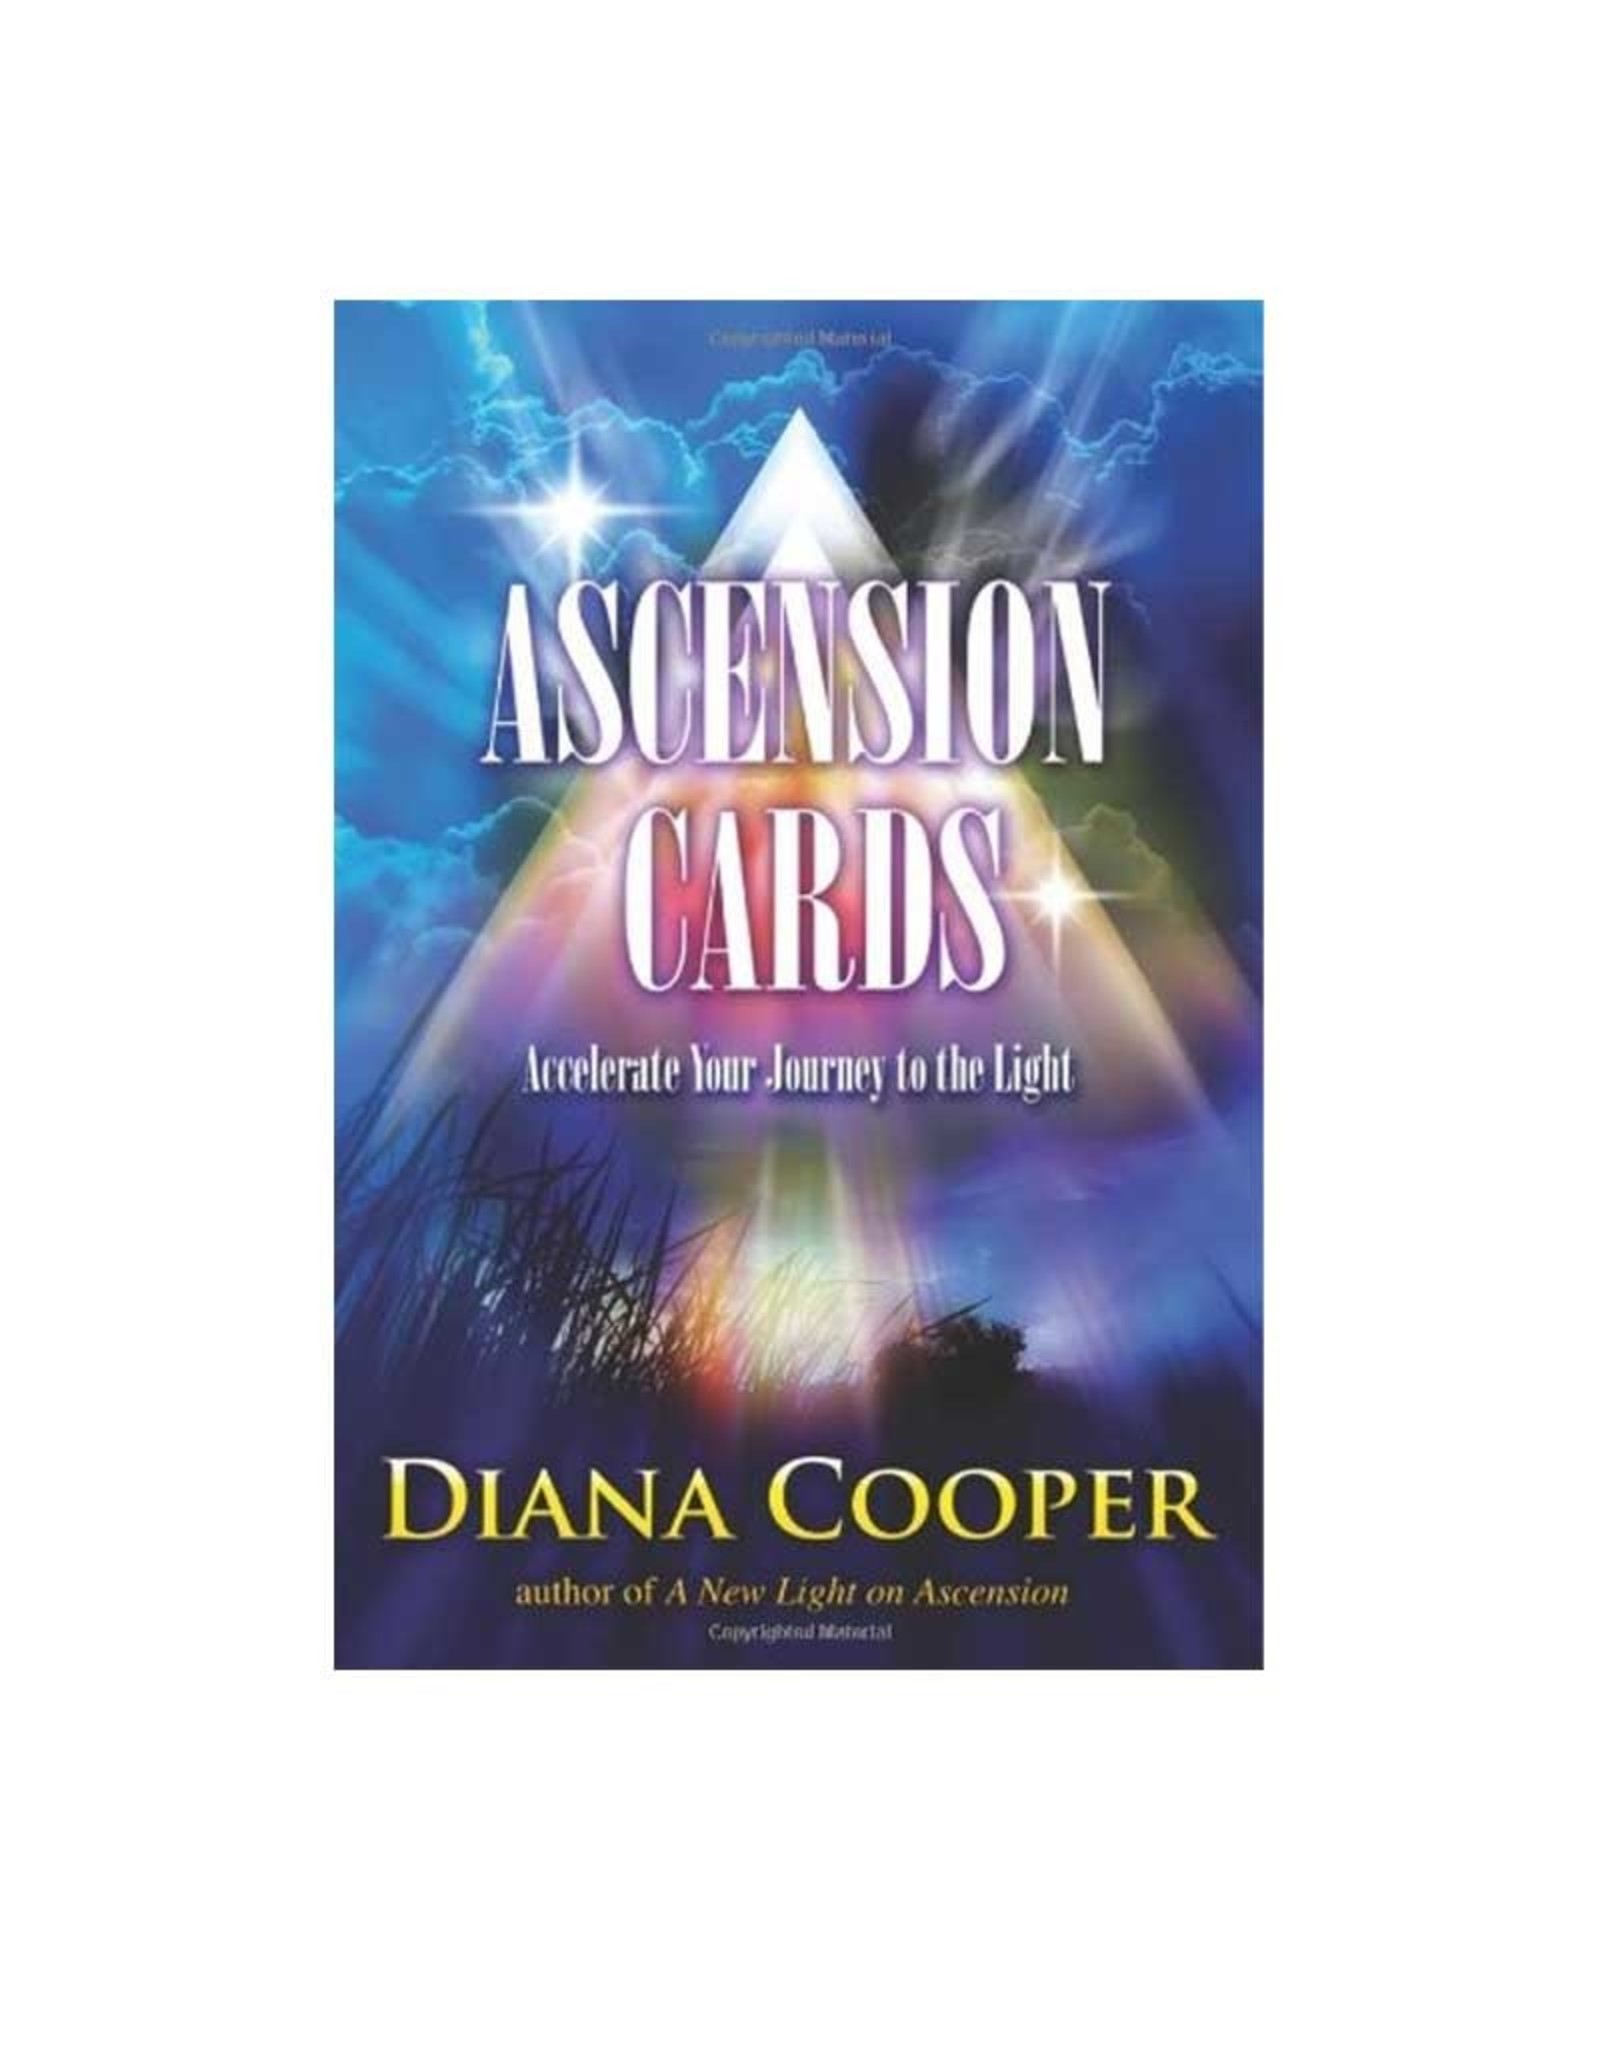 Diana Cooper Ascension Cards by Diana Cooper